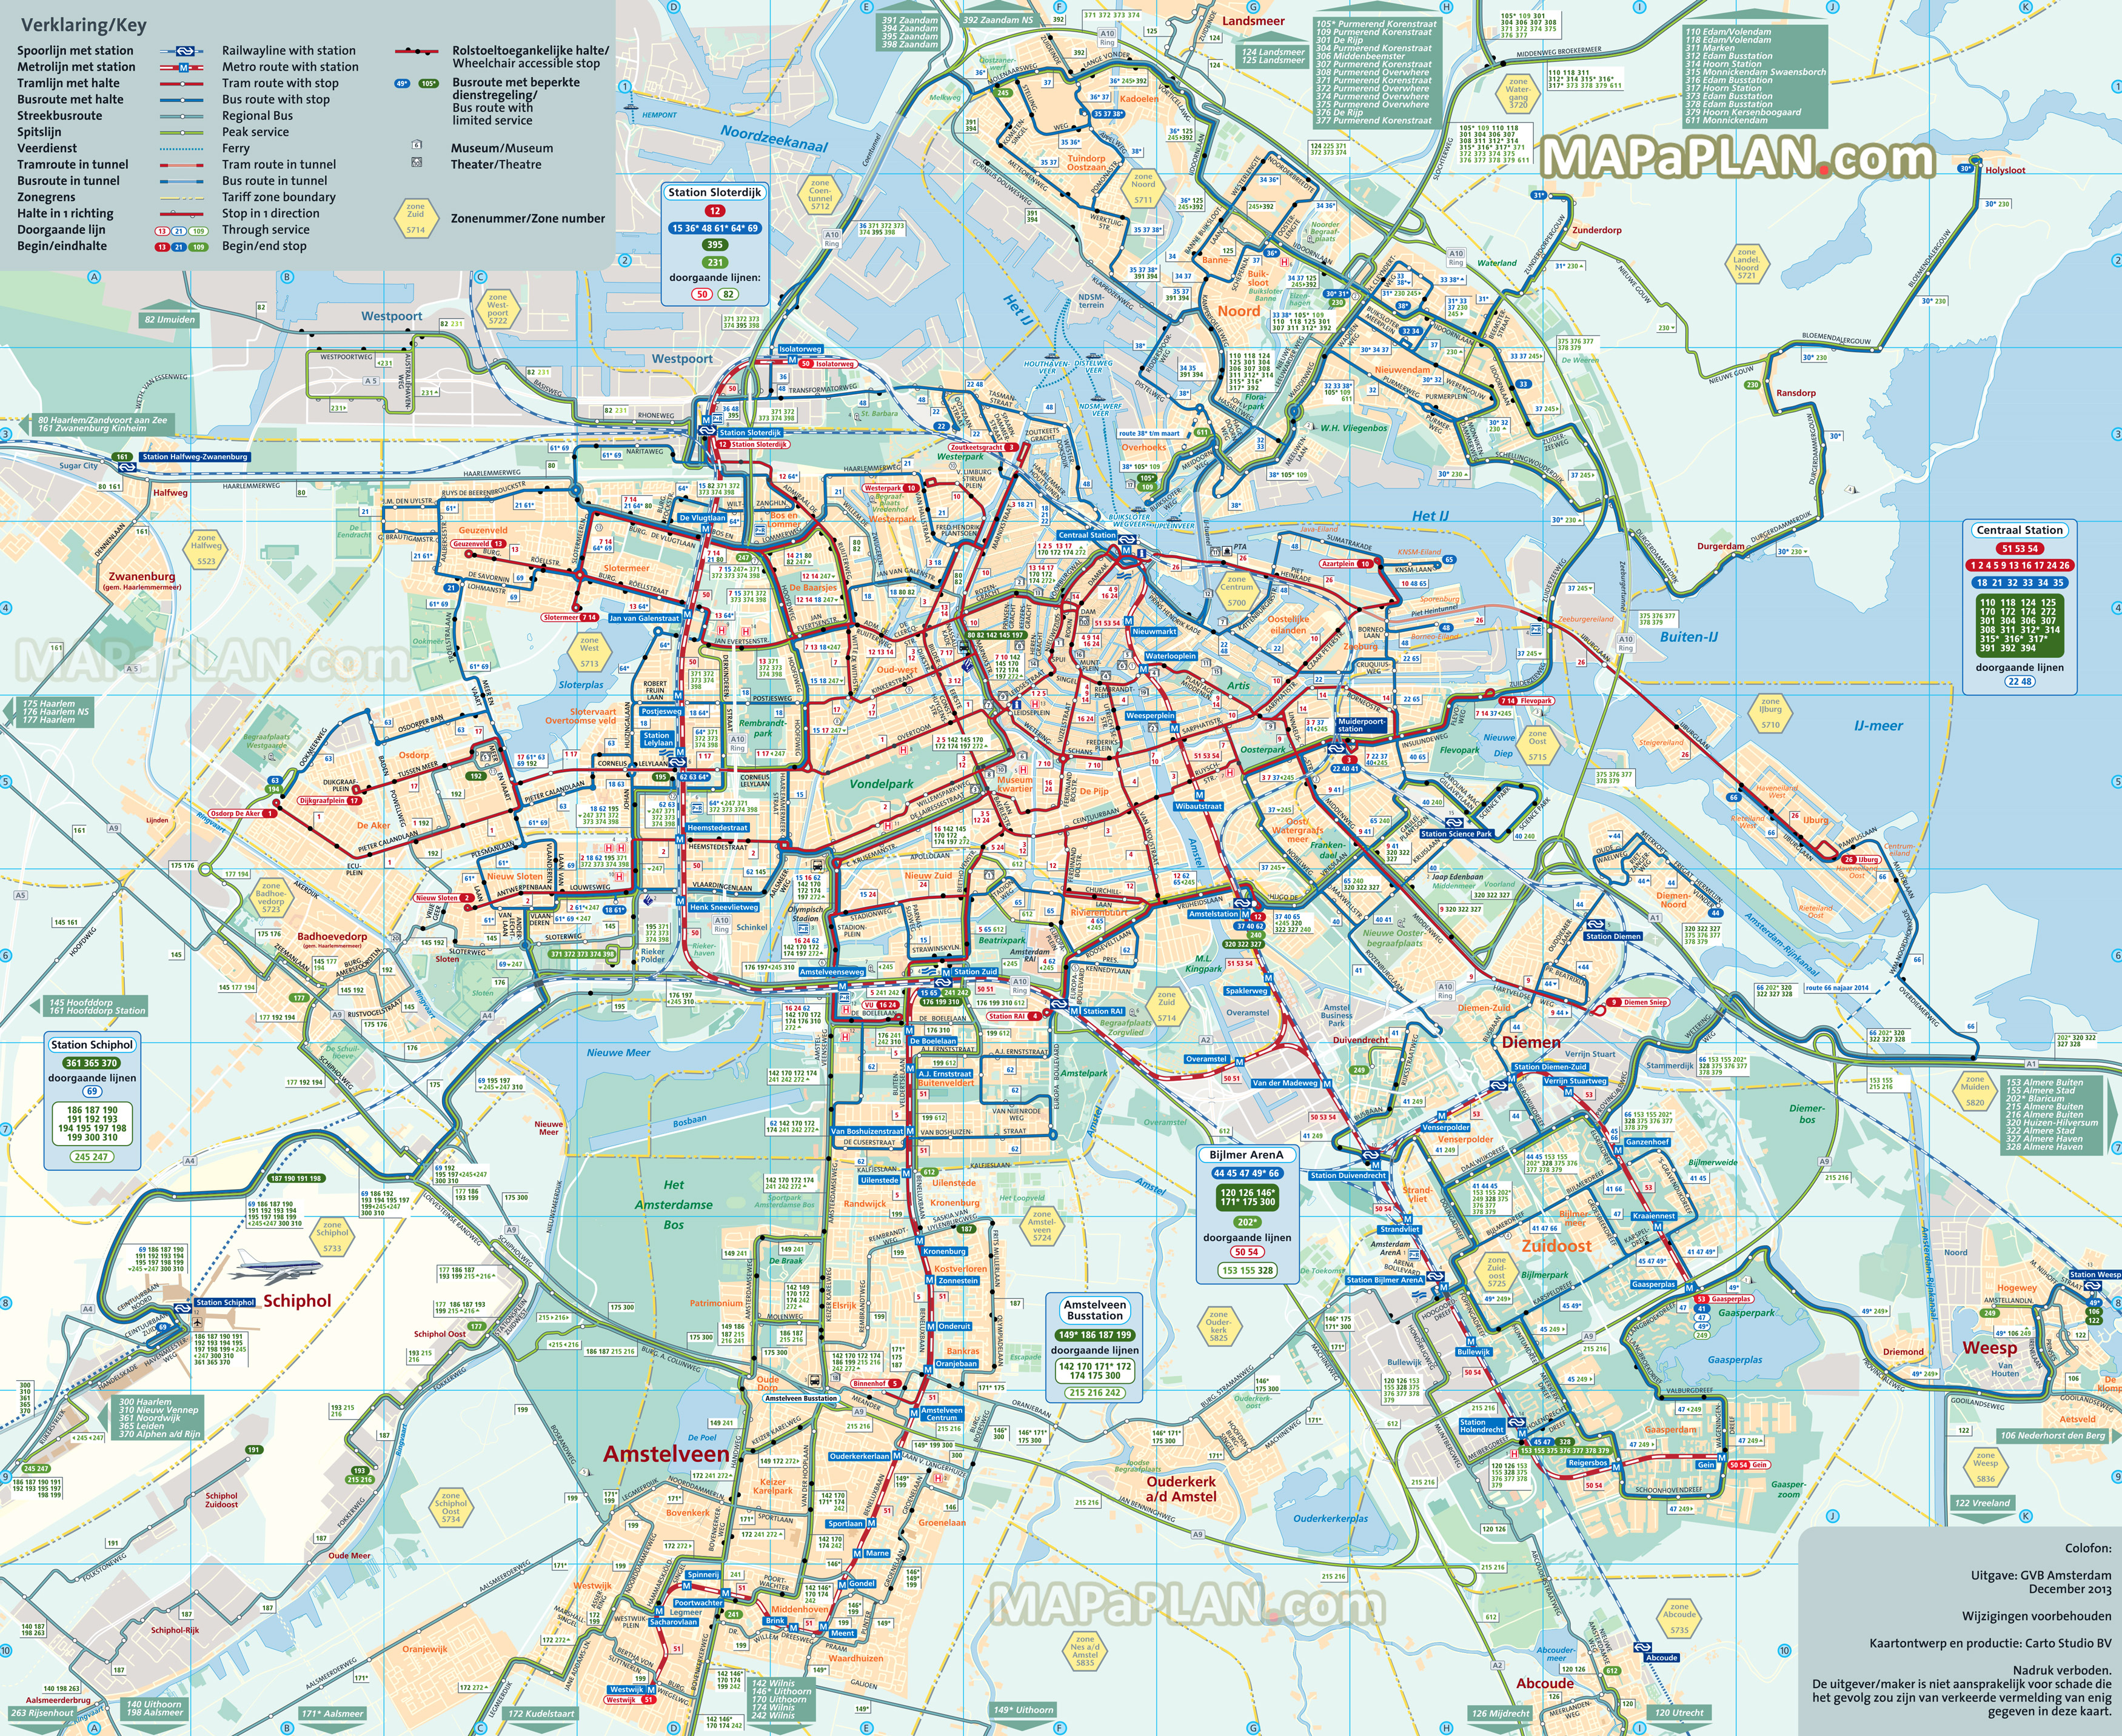 Amsterdam Map Official Gvb Public Transport System Network Plan Showing Tram Bus Metro Ferry Schiphol International Airport